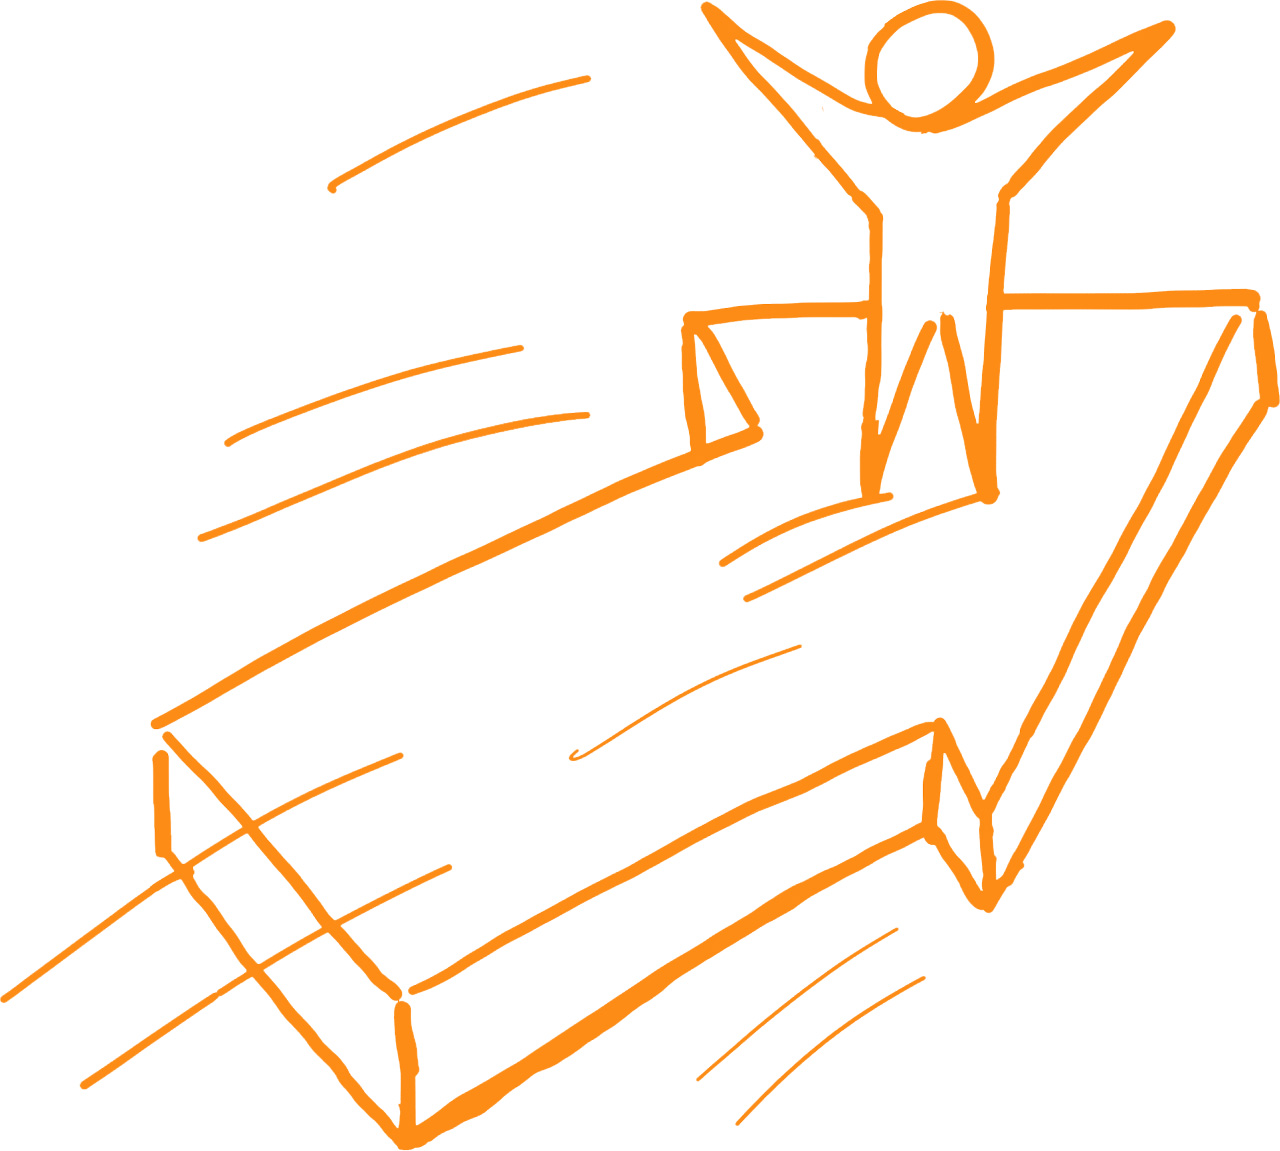 An illustration portraying a person standing atop an arrow, symbolizing growth and progress. The individual appears confident and upward-looking, indicating their success and advancement.